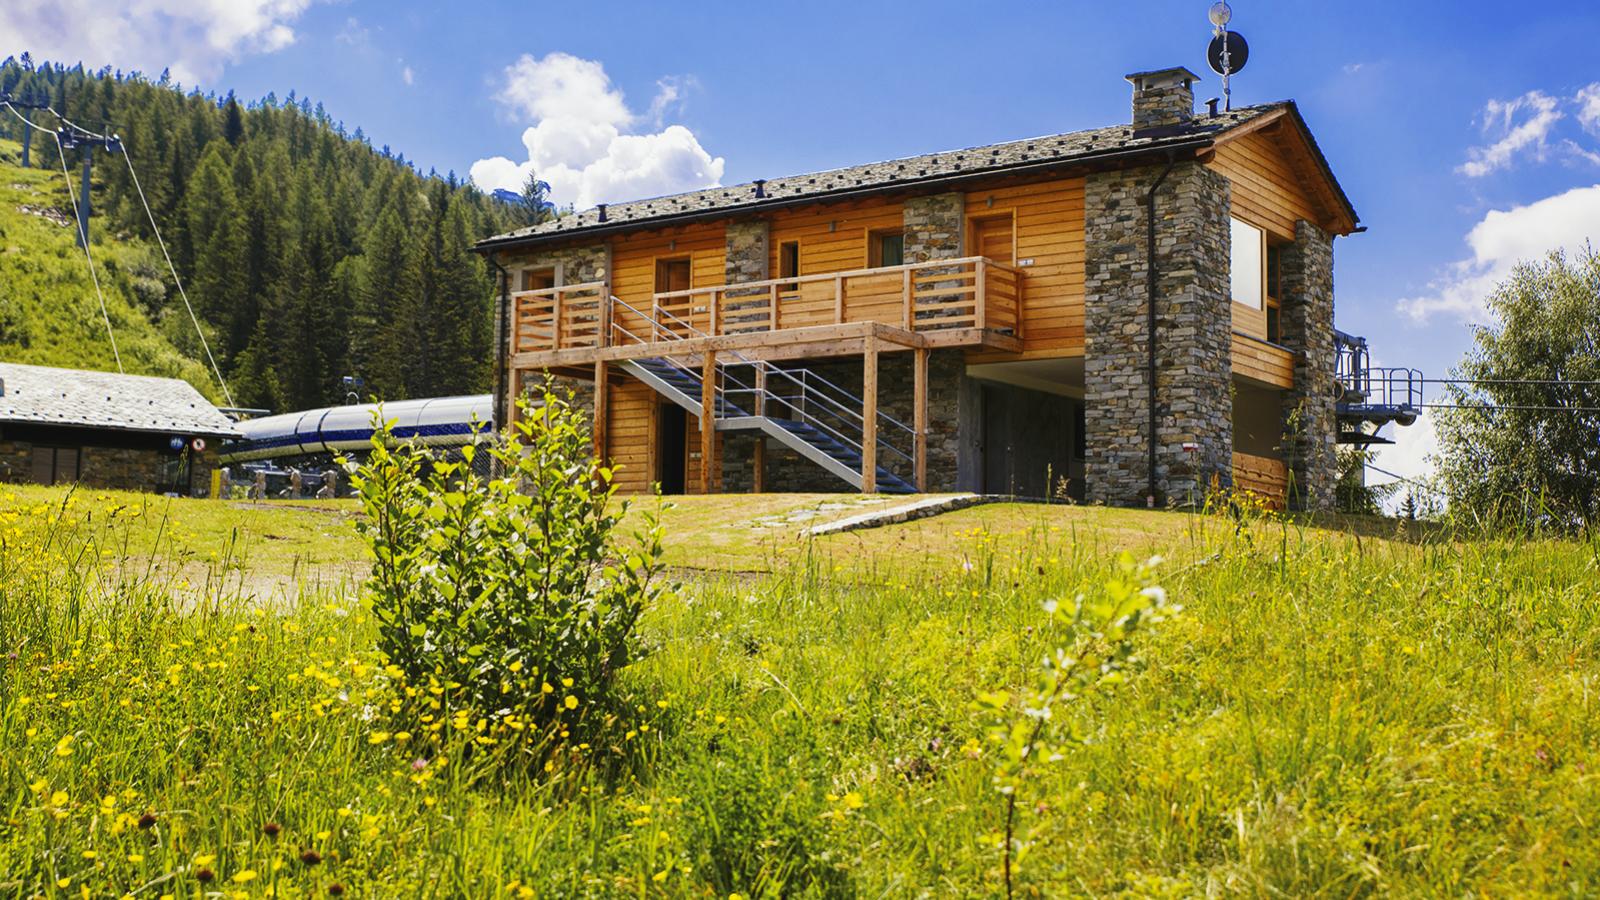 Accommodation at Barchi: a cosy nest in the midst of nature